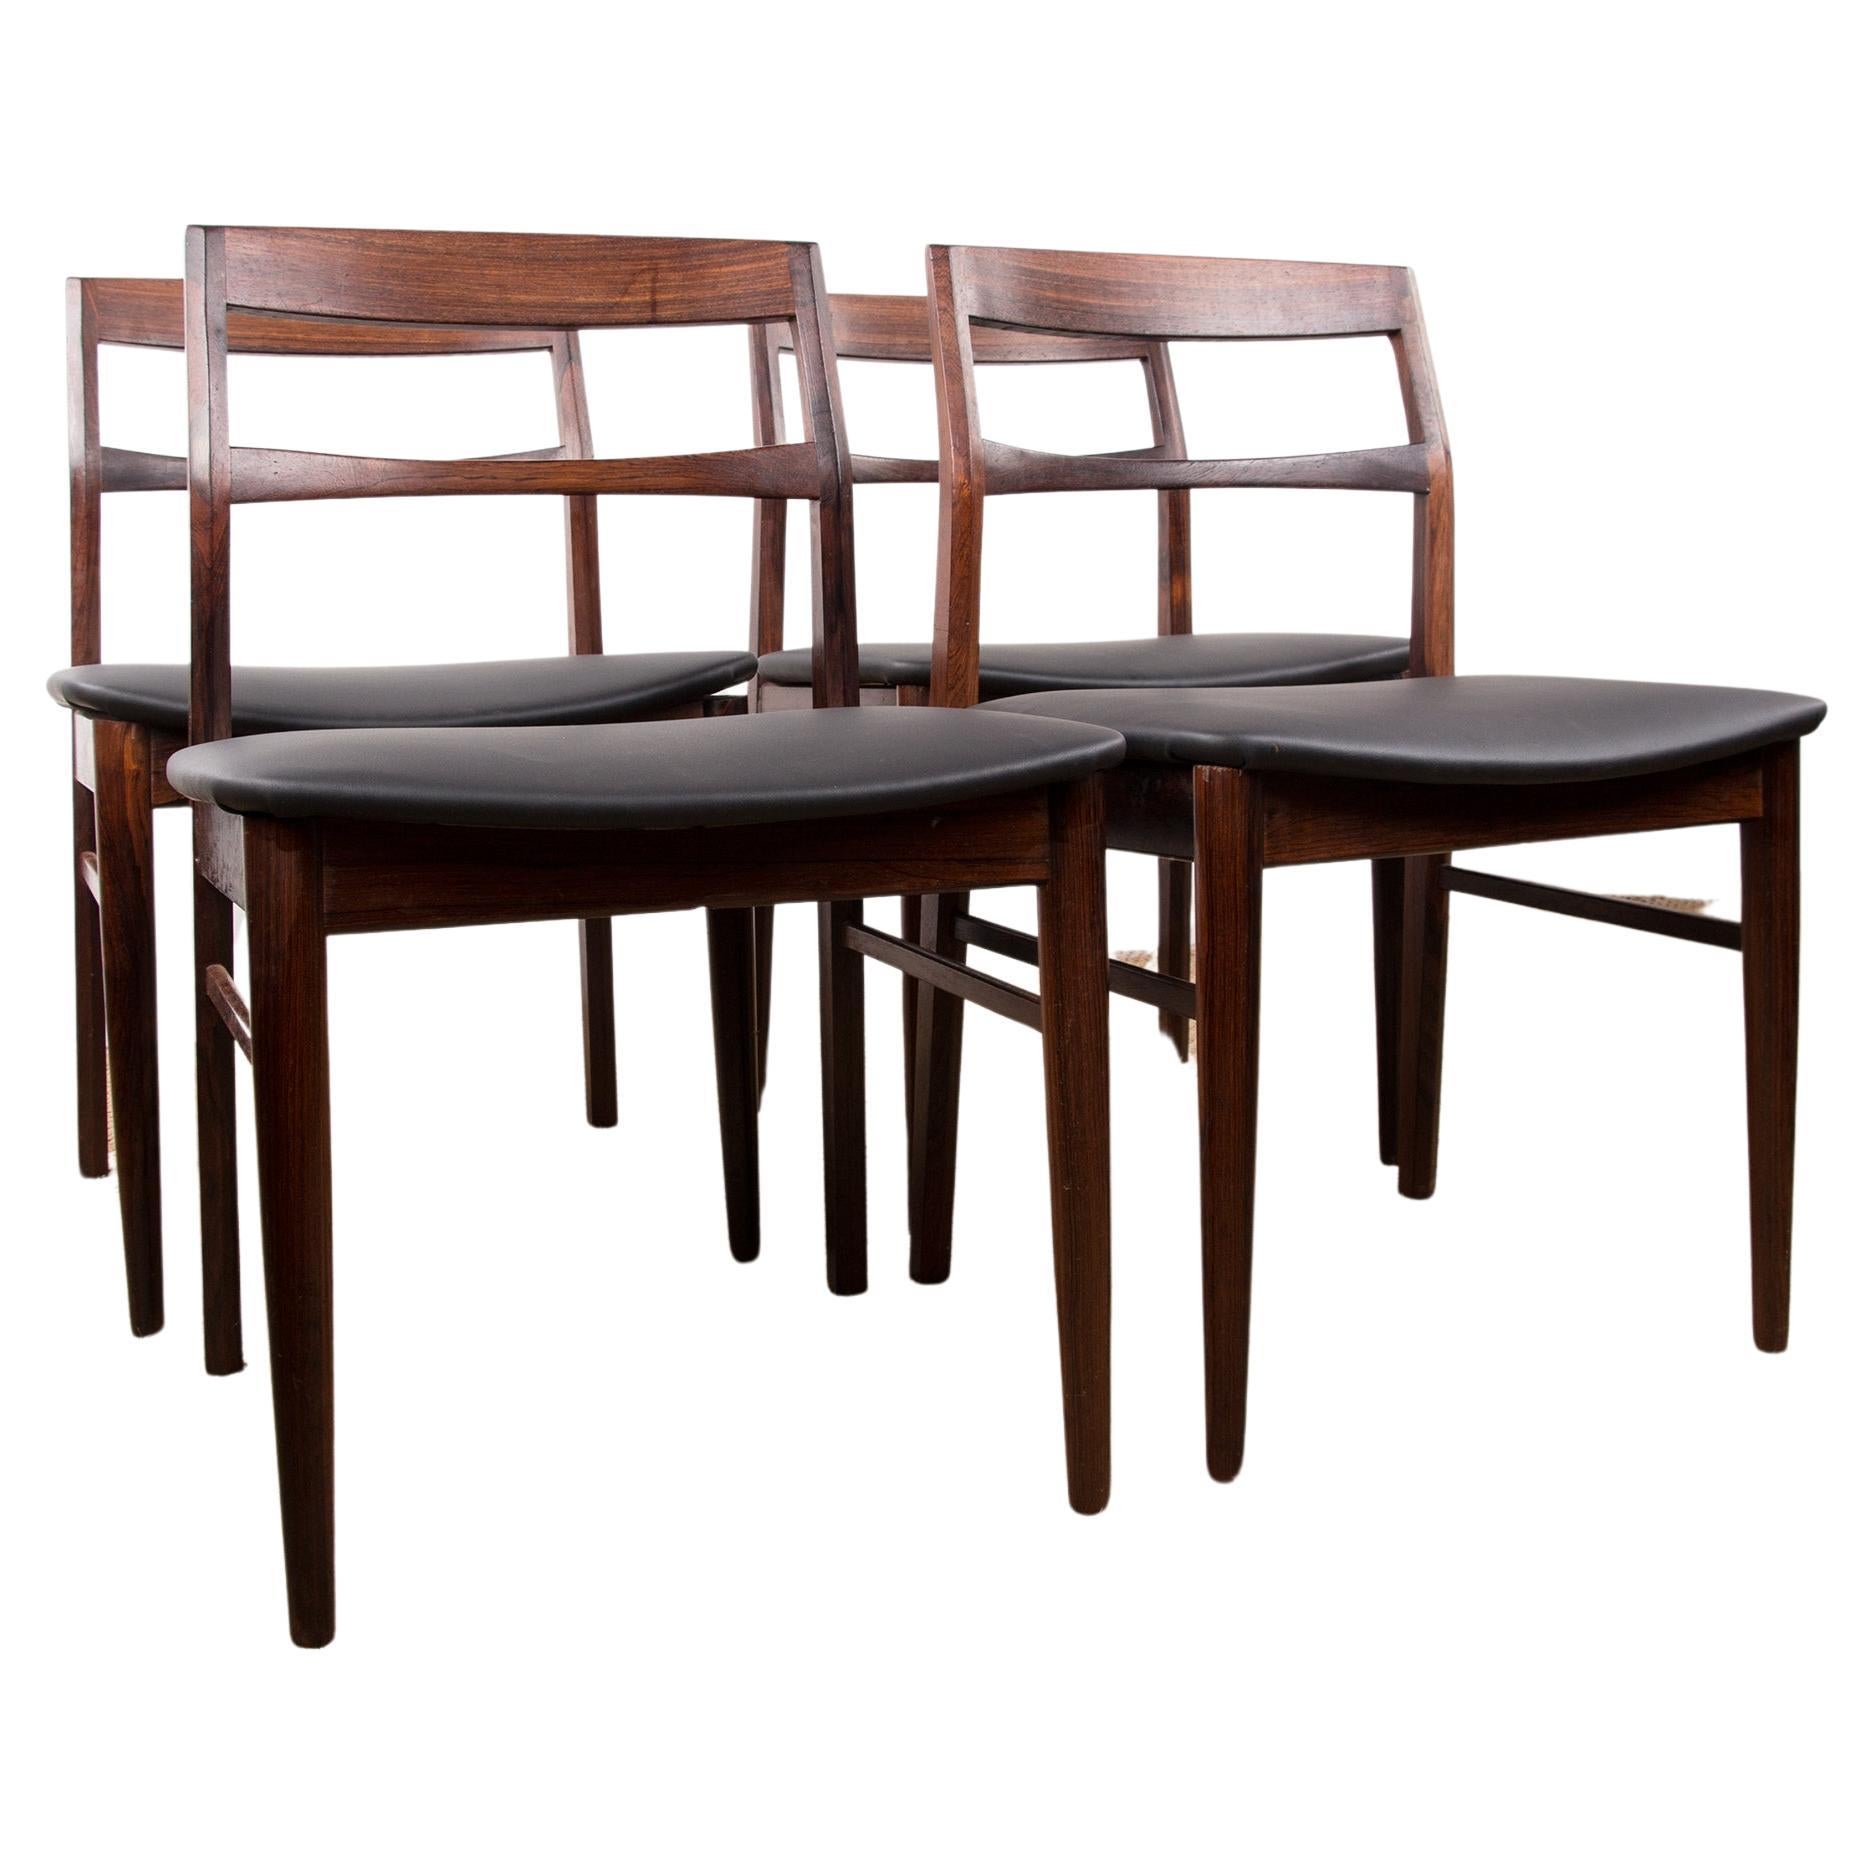 Set of 4 Danish chairs in Rosewood and Skai new by Henning Kjaernulf for Vejl